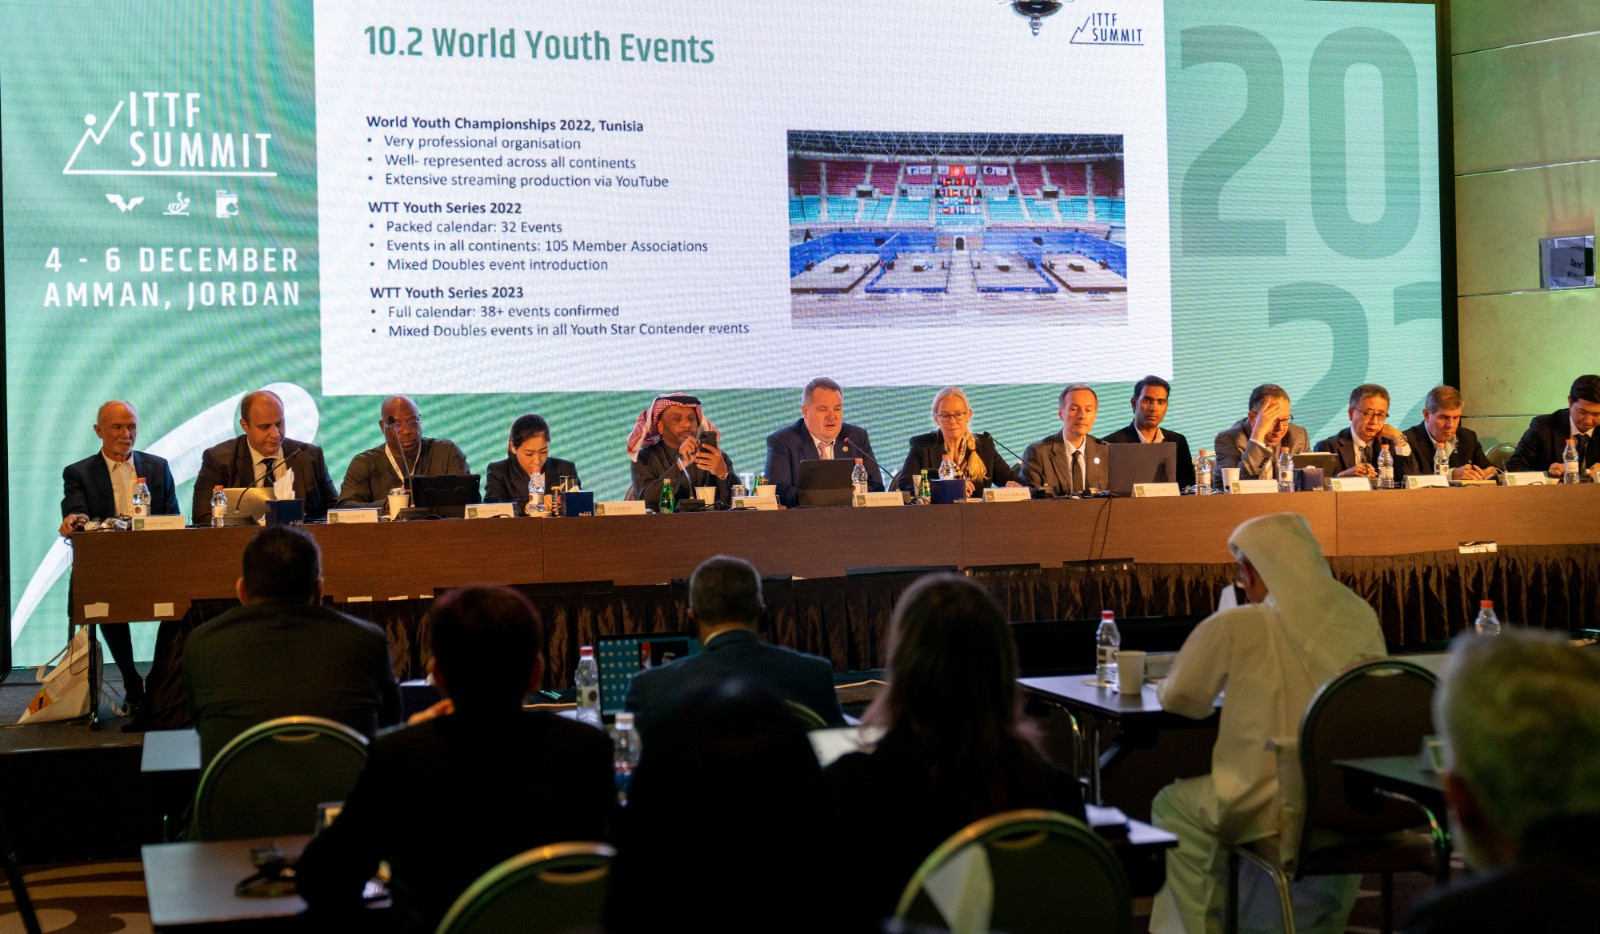 Novo Gorica and Helsingborg were selected as hosts for the 2023 and 2024 World Youth Championships, respectively, at the ITTF Summit ©ITTF/Owen Hammond 